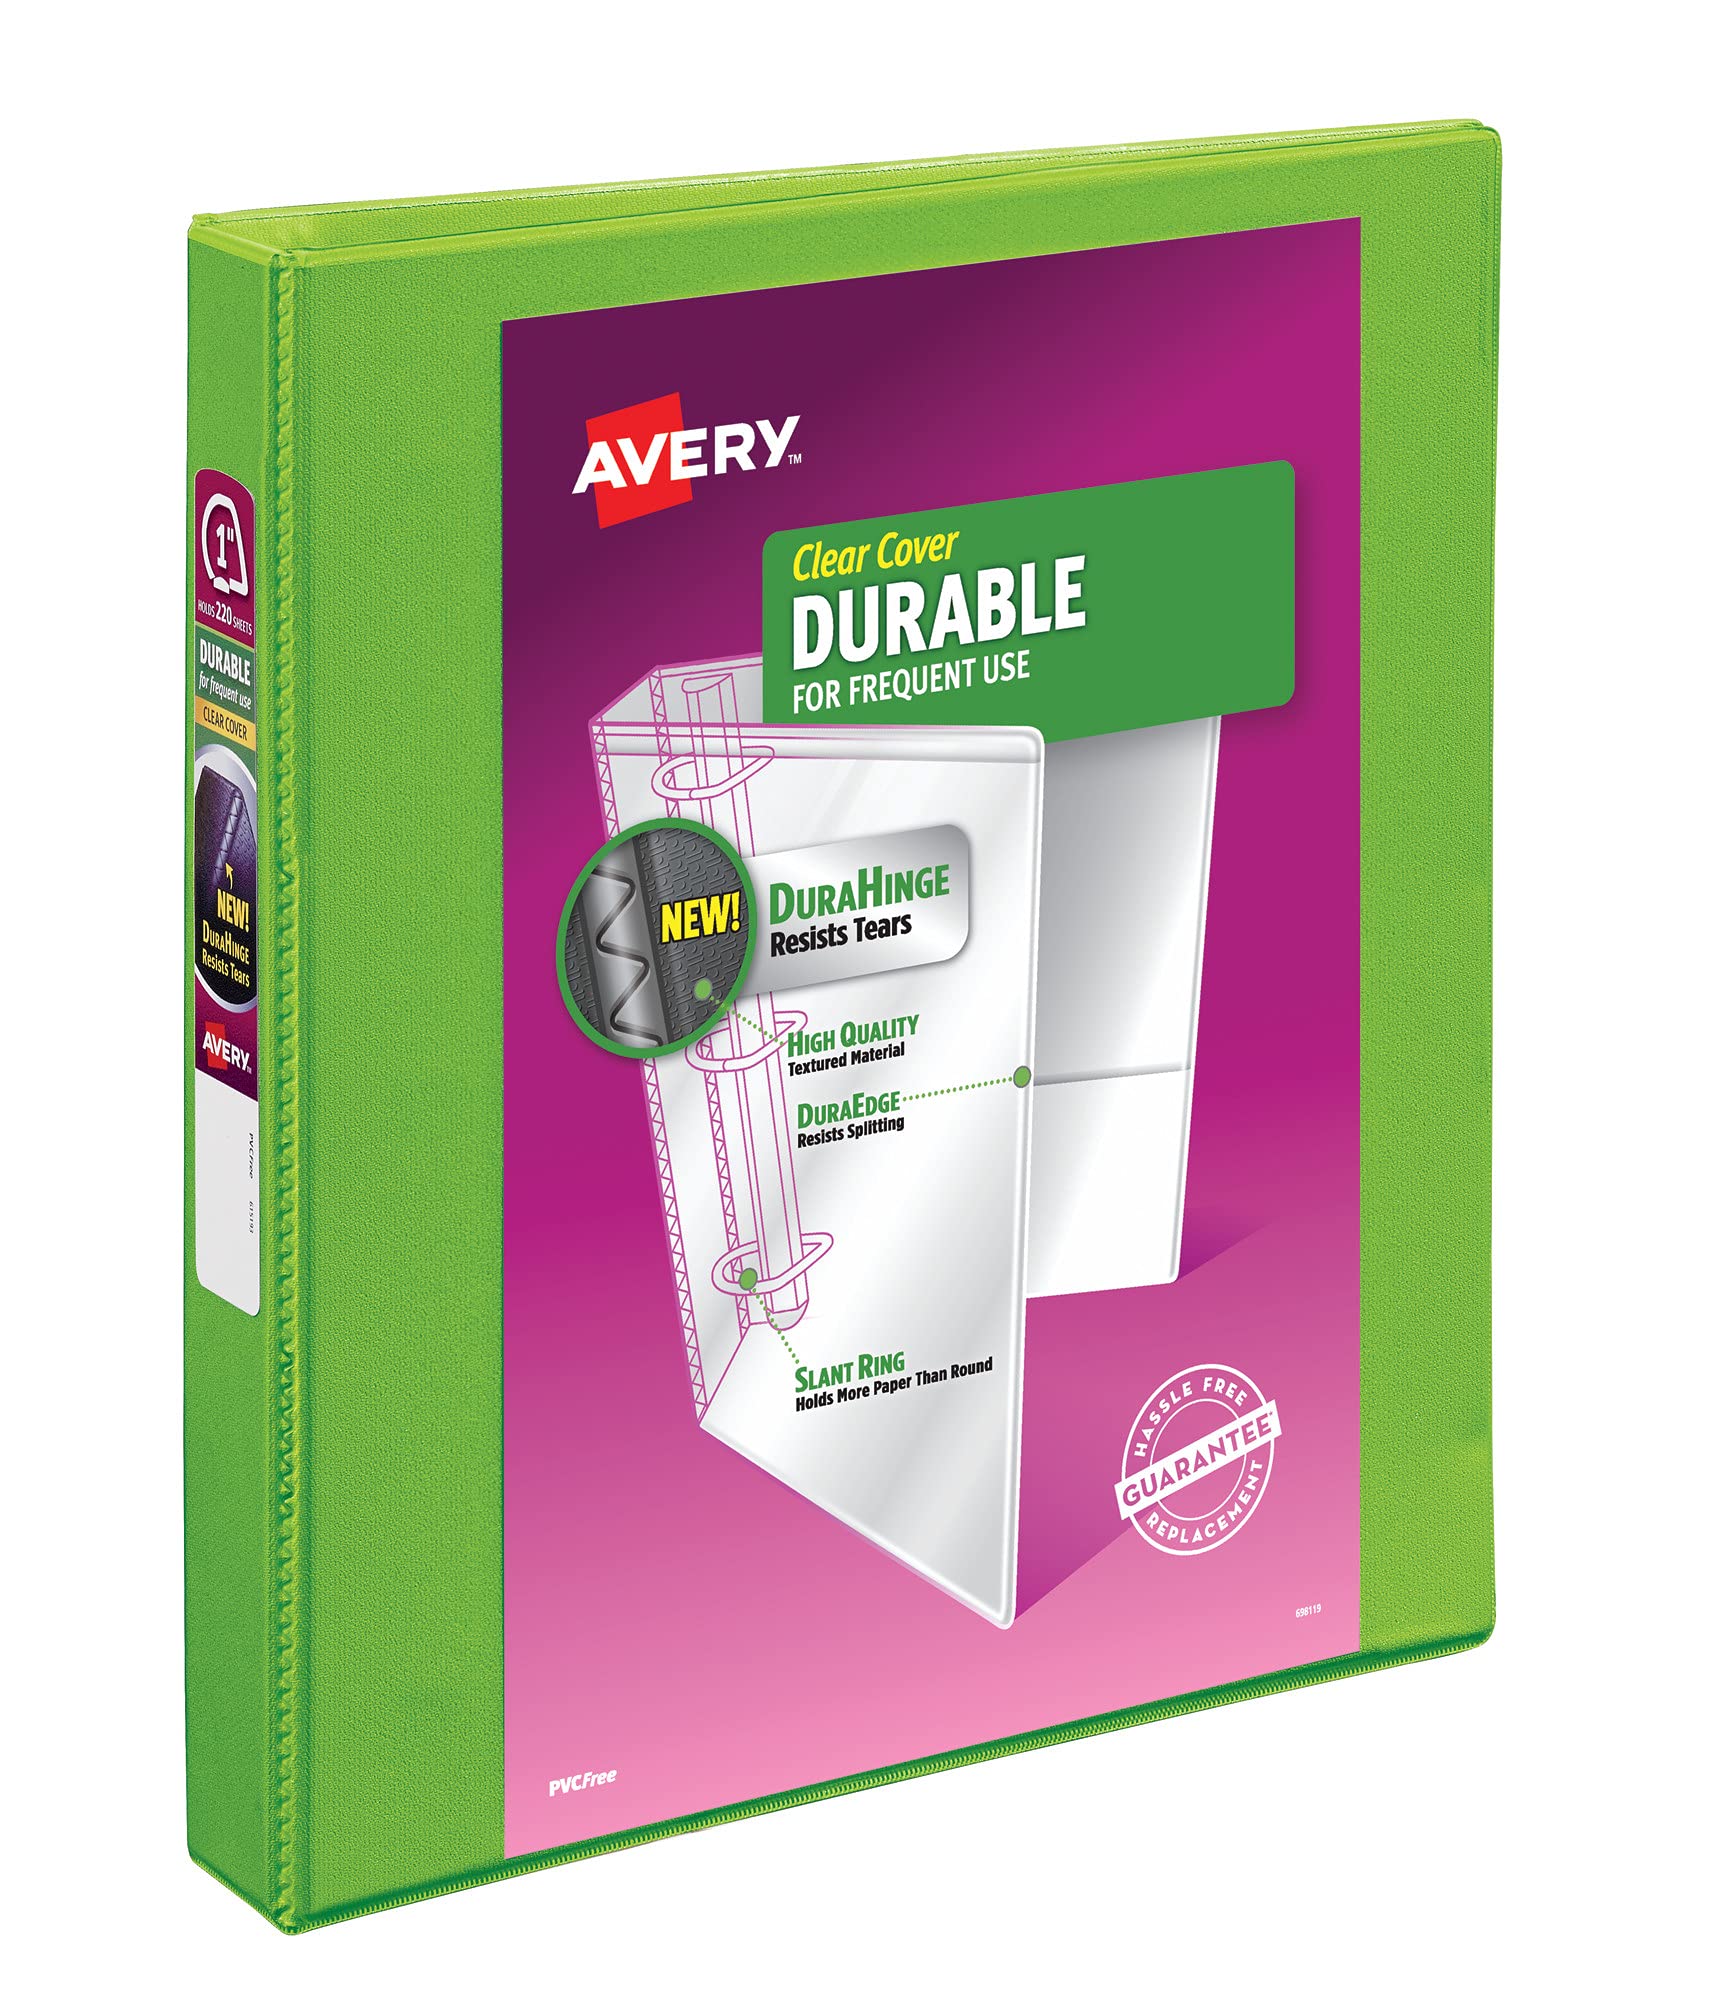 Book Cover Avery Durable View 3 Ring Binder, 1 Inch Slant Rings, 1 Green Binder (17832) Green 1